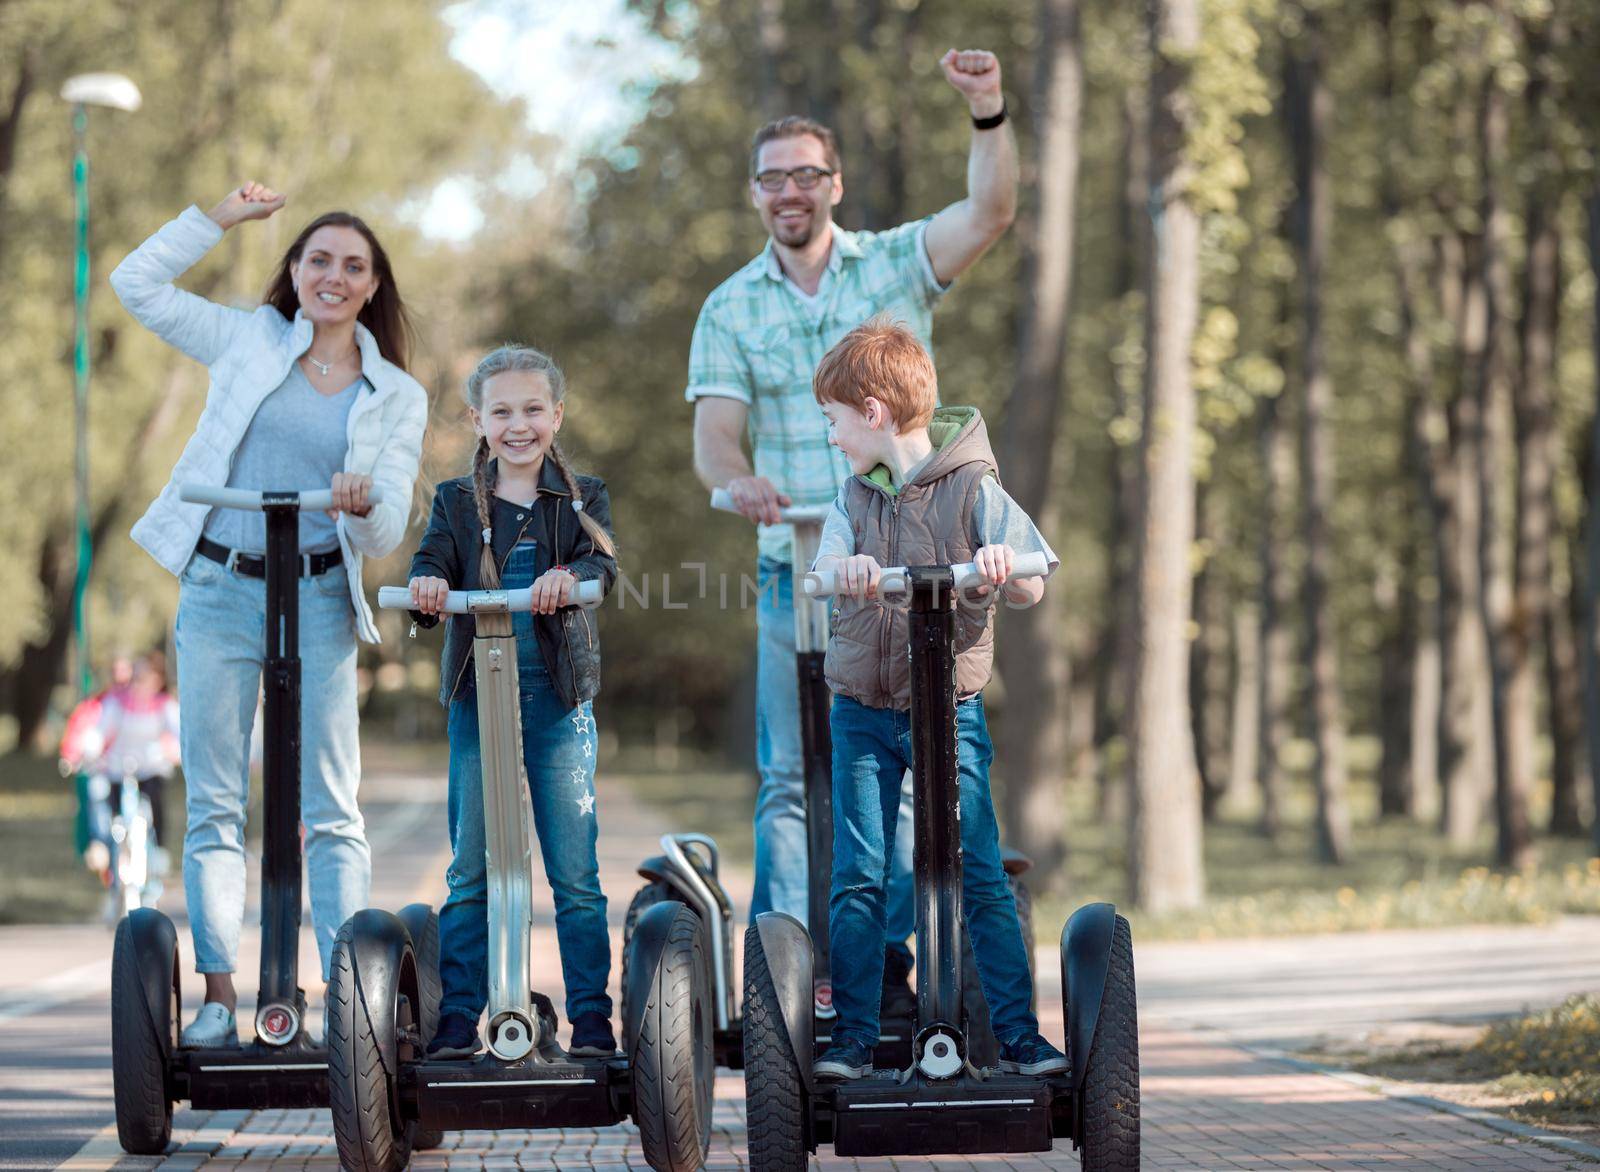 modern family riding an electric mini hoverboard in the Park. We go together.